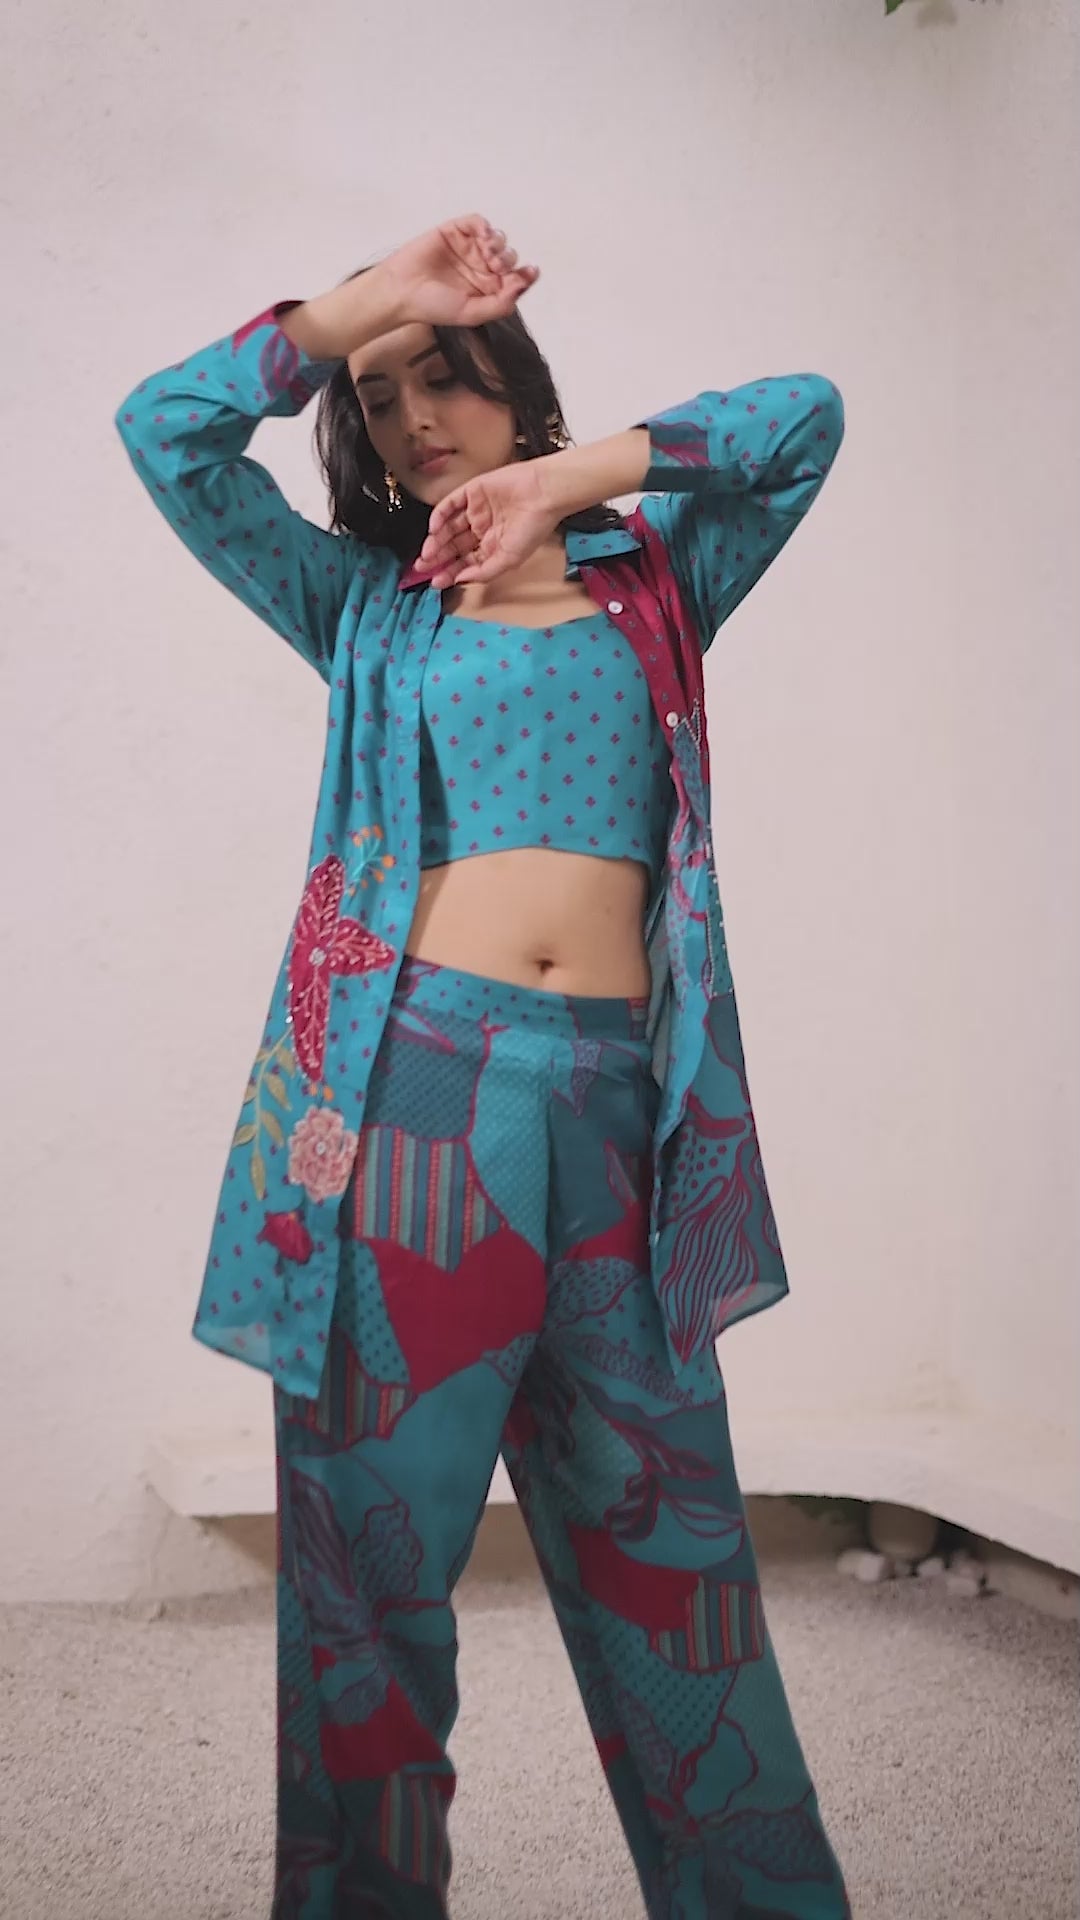 Kaftanize Teal Blue Multicolored Abstract Print With Sequins Viscose 3 piece Co-Ord Set With Camisole